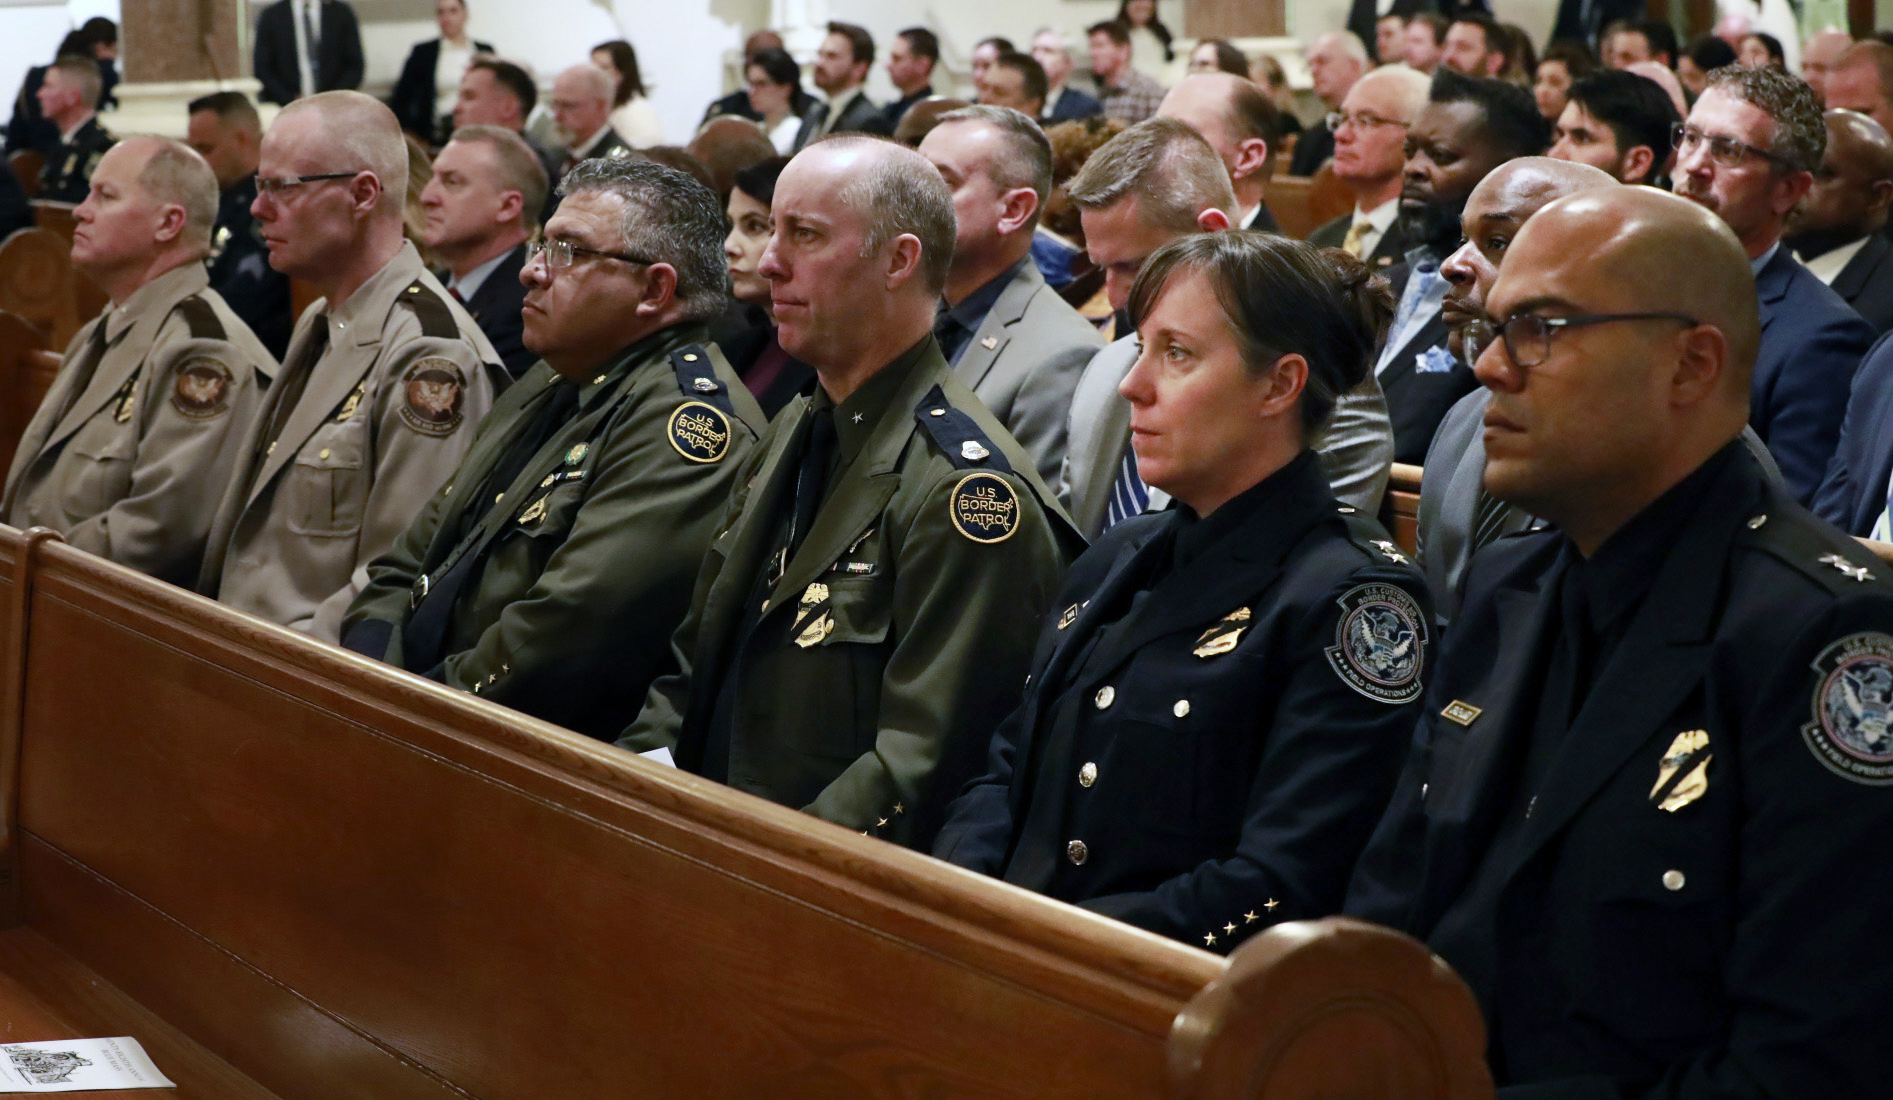 CBP leaders attend the annual Blue Mass May 3 at St. Patrick Church in Washington, D.C.